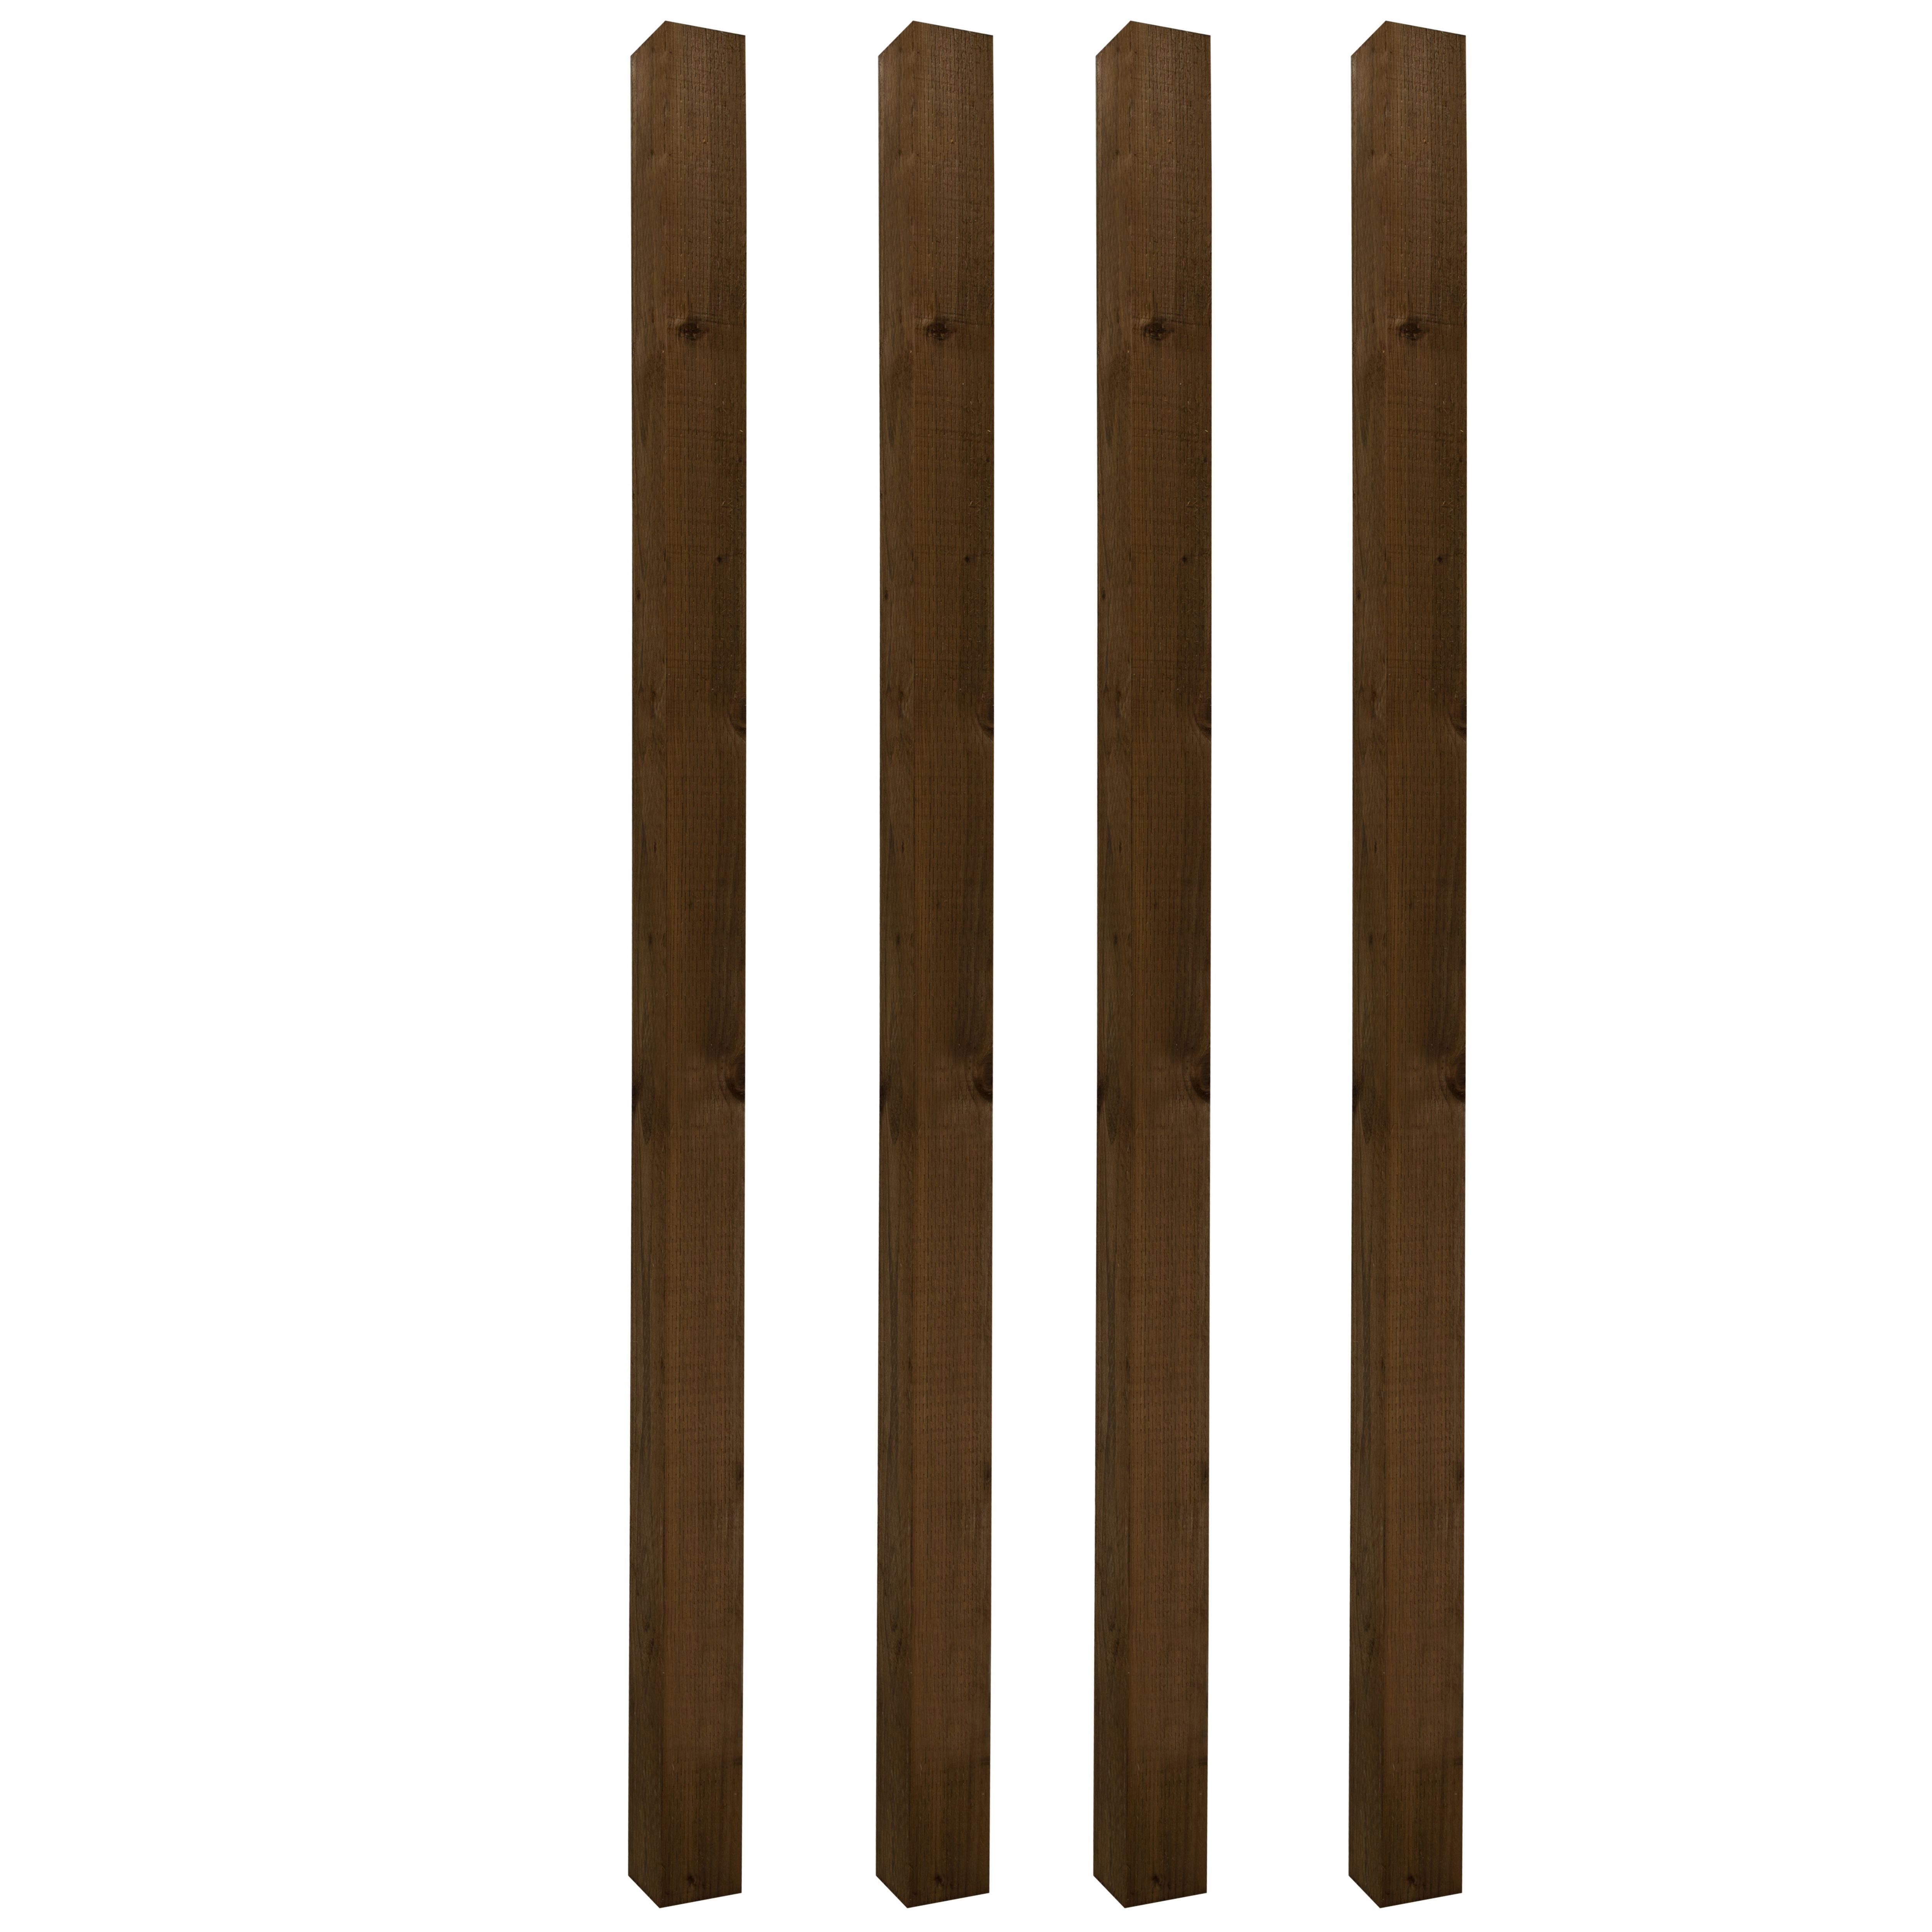 UC4 Brown Square Wooden Fence post (H)2.4m (W)100mm, Pack of 4